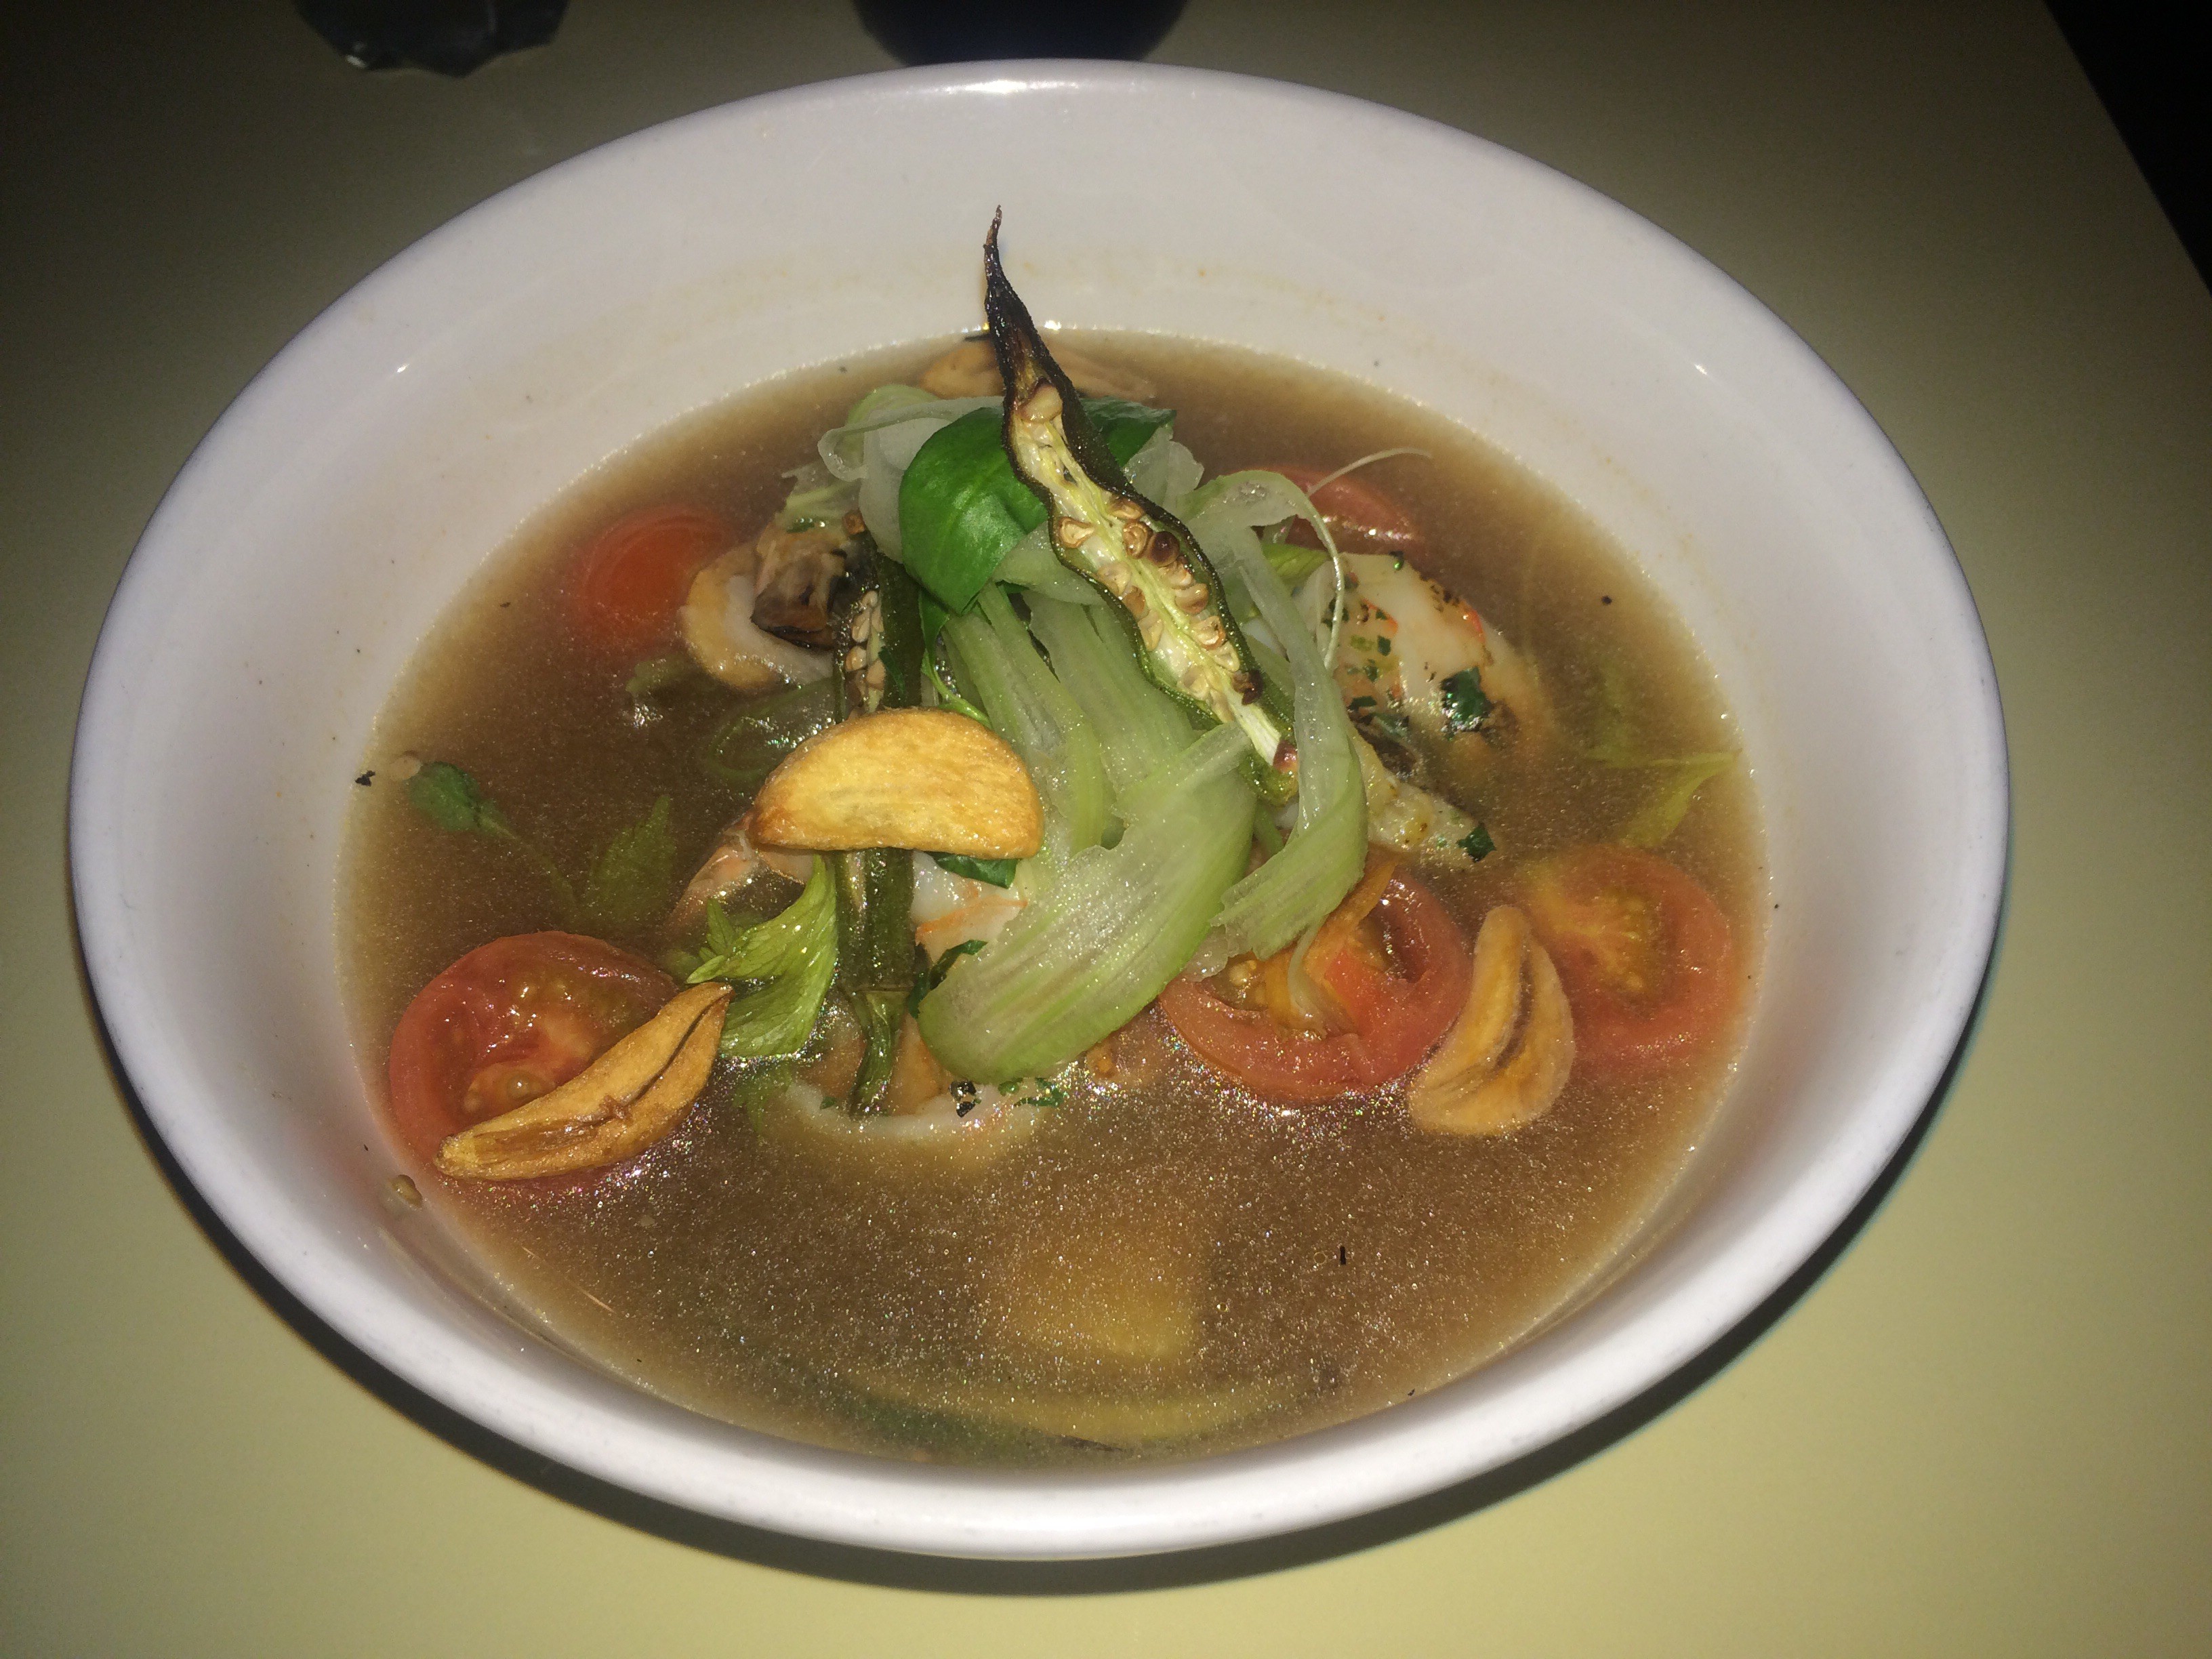 Chef Chloe's Sweet and Sour Soup at East Borough